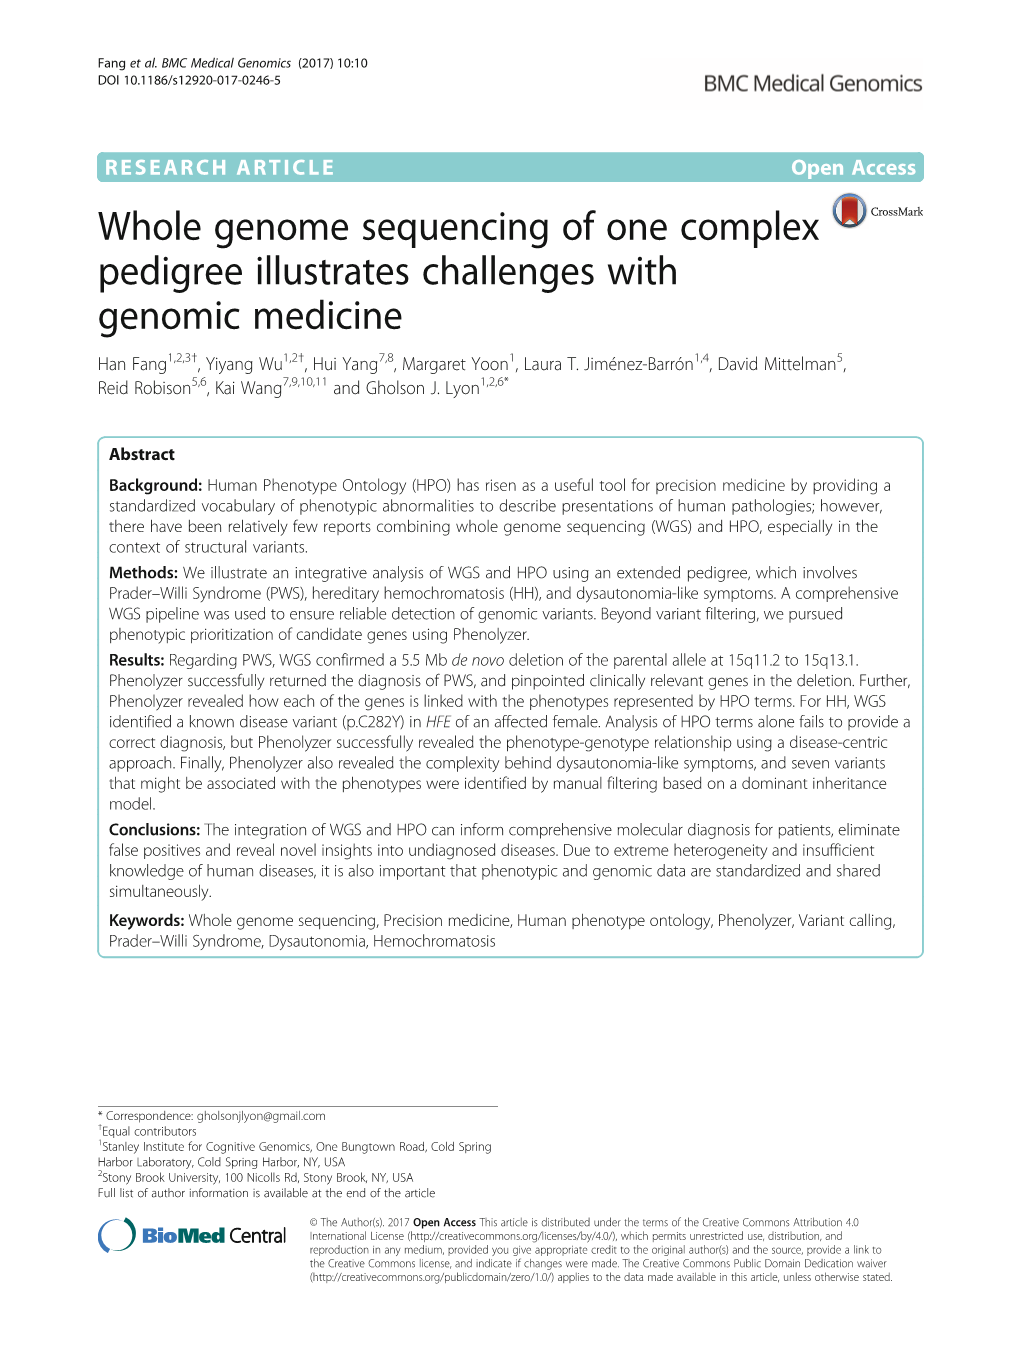 Whole Genome Sequencing of One Complex Pedigree Illustrates Challenges with Genomic Medicine Han Fang1,2,3†, Yiyang Wu1,2†, Hui Yang7,8, Margaret Yoon1, Laura T